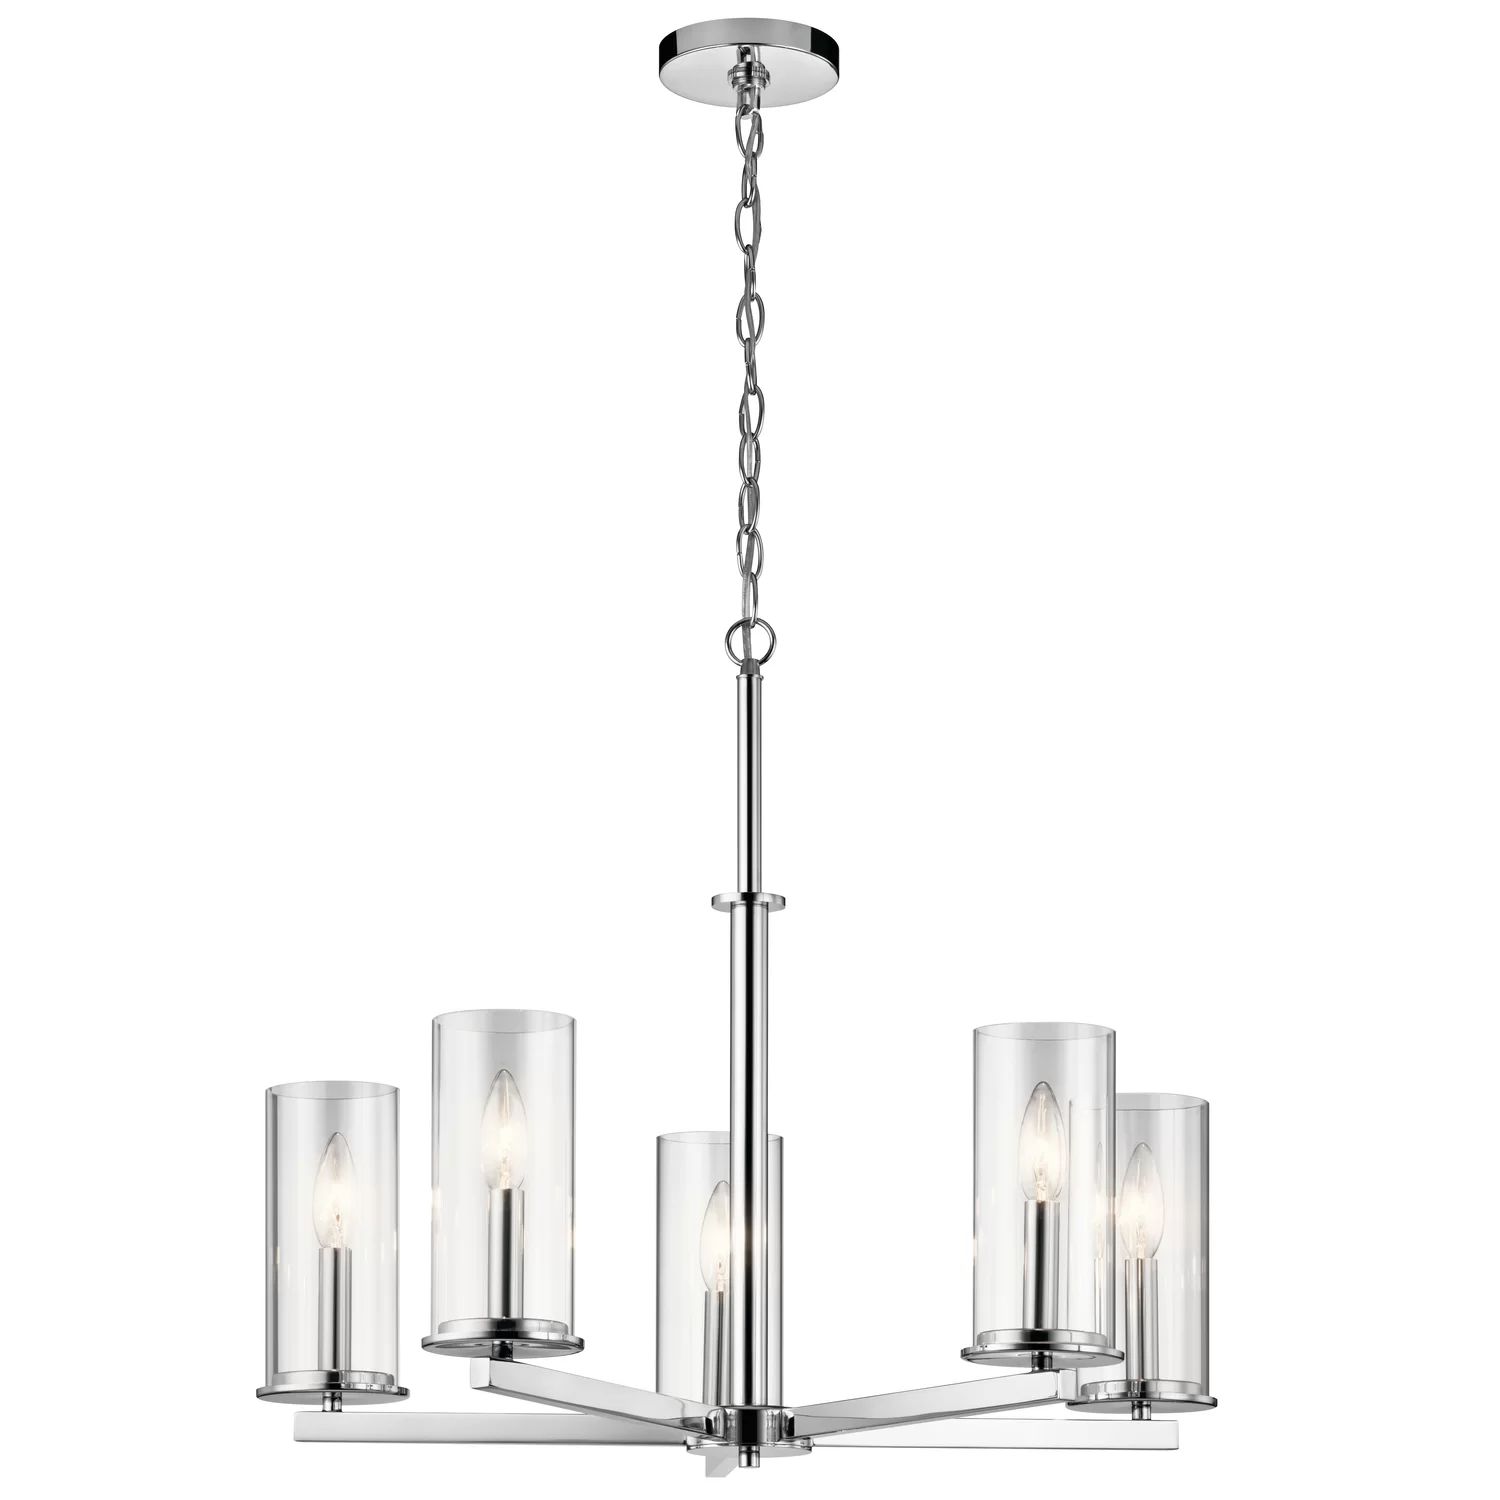 Chelsie 5-Light Shaded Classic / Traditional Chandelier | Wayfair Professional